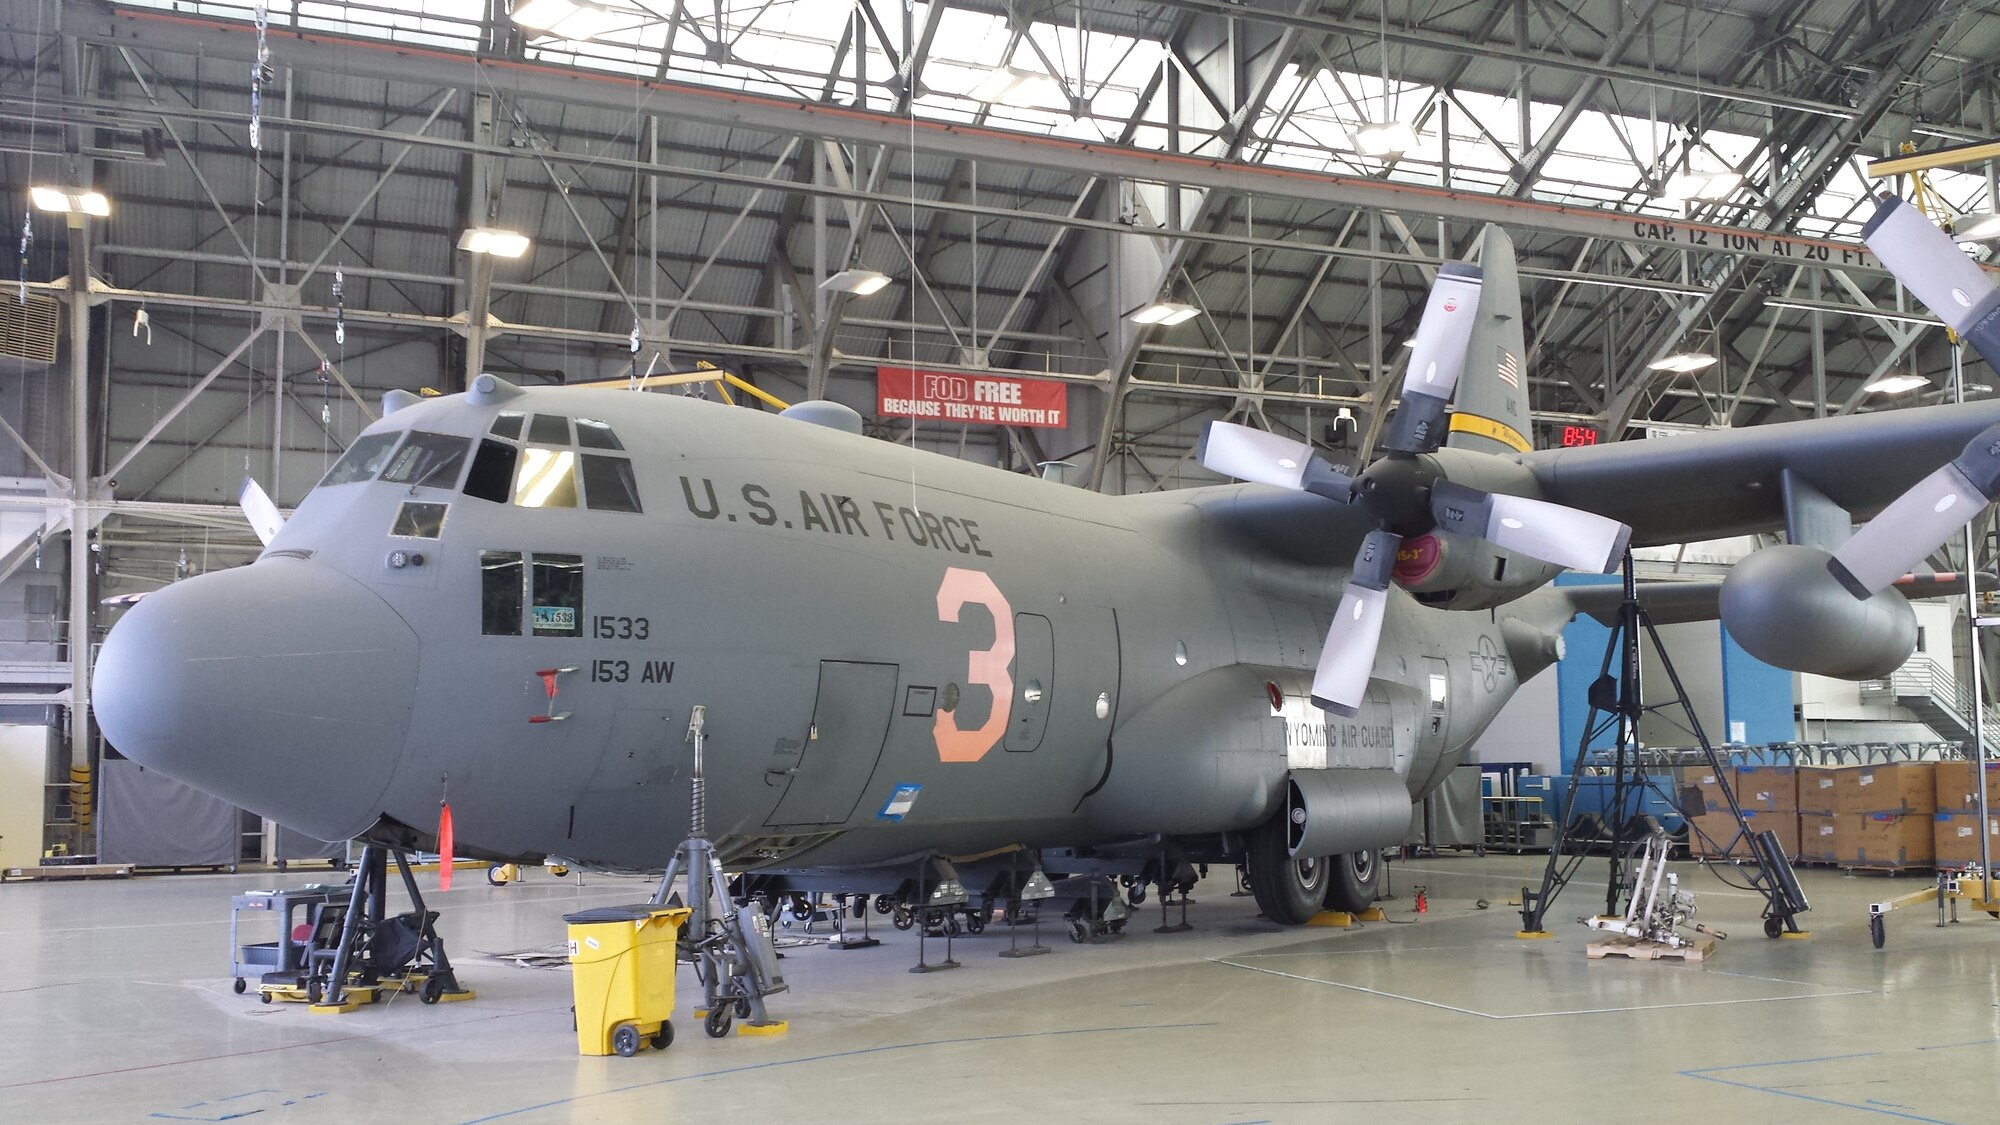 The Wyoming Air National Guard MAFFS 3 air tanker sits in hangar one at Hill Air Force Base while undergoing extensive repairs after landing without fully-extended nose gear Aug. 17, 2014. There were no injuries to the crew and damage was limited to the nose gear, structures and wiring in the lower front end of the $37 million aircraft. (Photo courtesy of Hill Air Force Base, Utah)